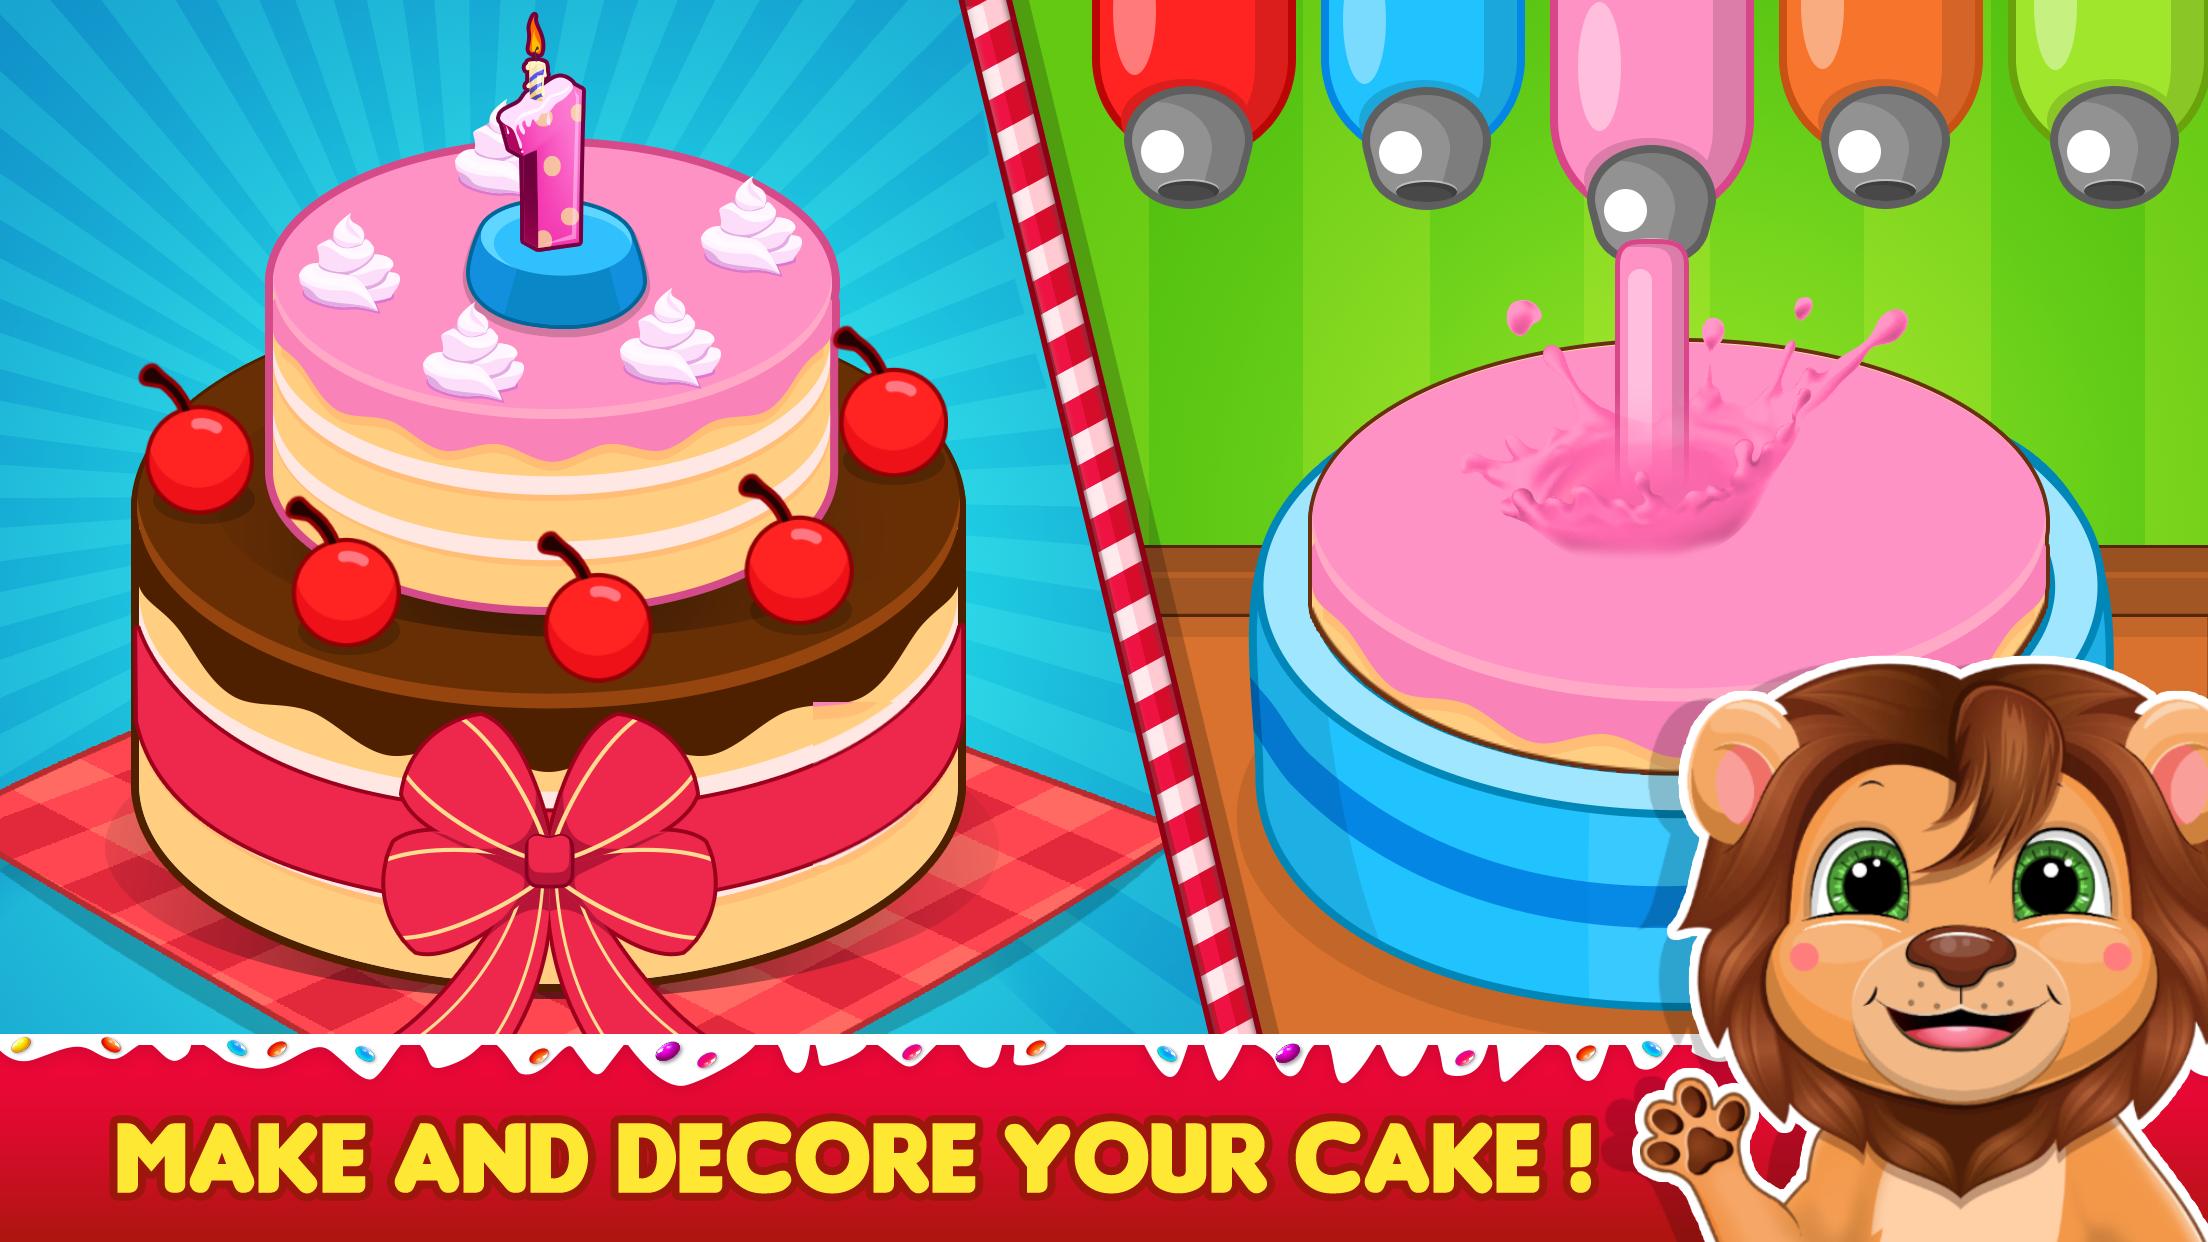 Download My Cake Maker Bakery Cake Game android on PC